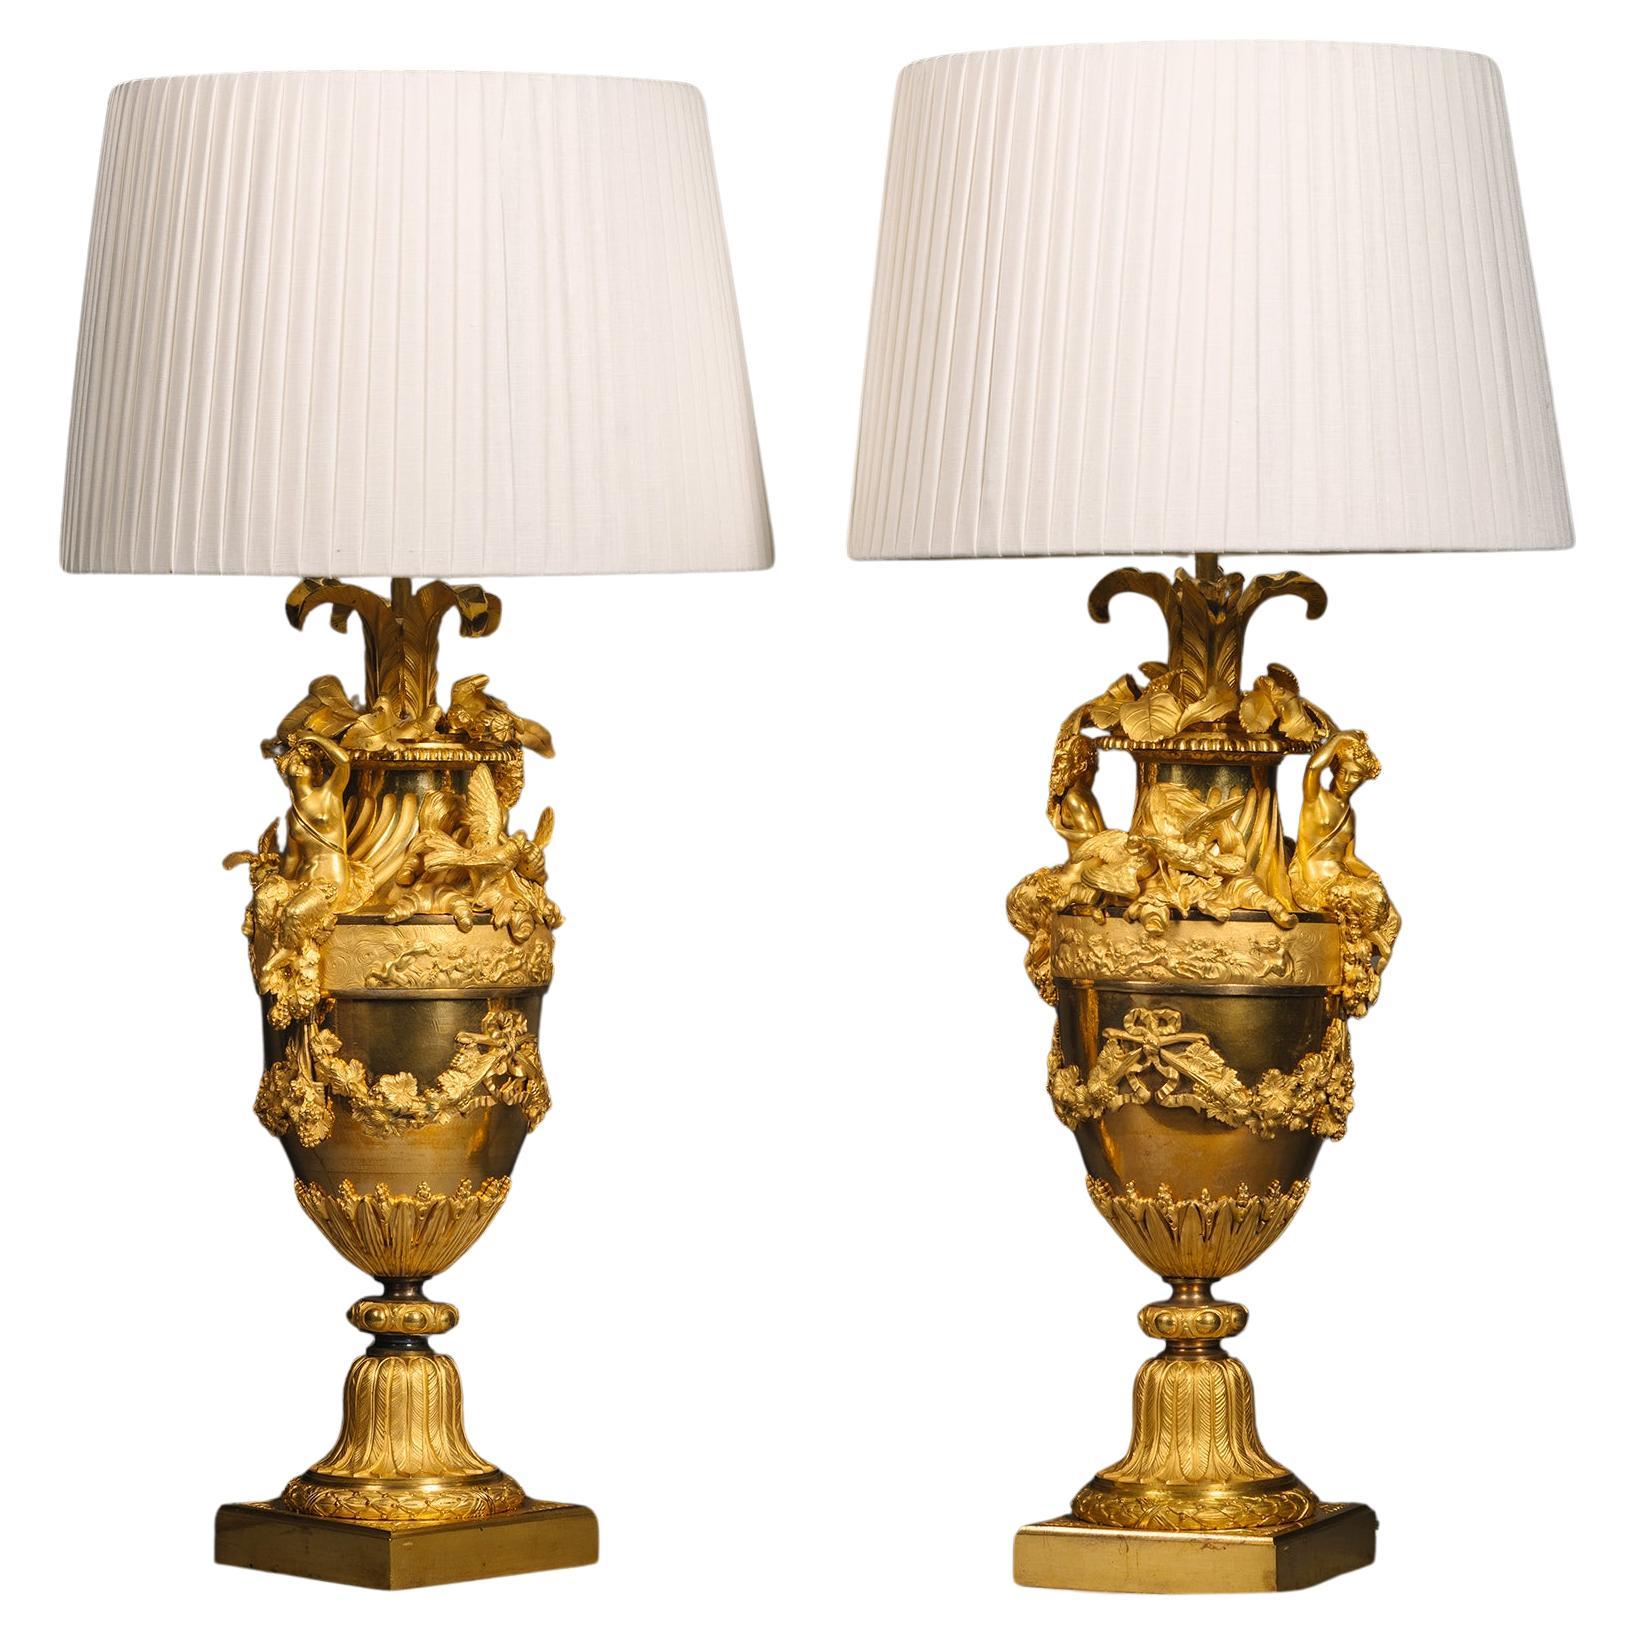 A Pair Napoleon III Gilt-Bronze Vases, Mounted as Table Lamps, By Henri Picard For Sale